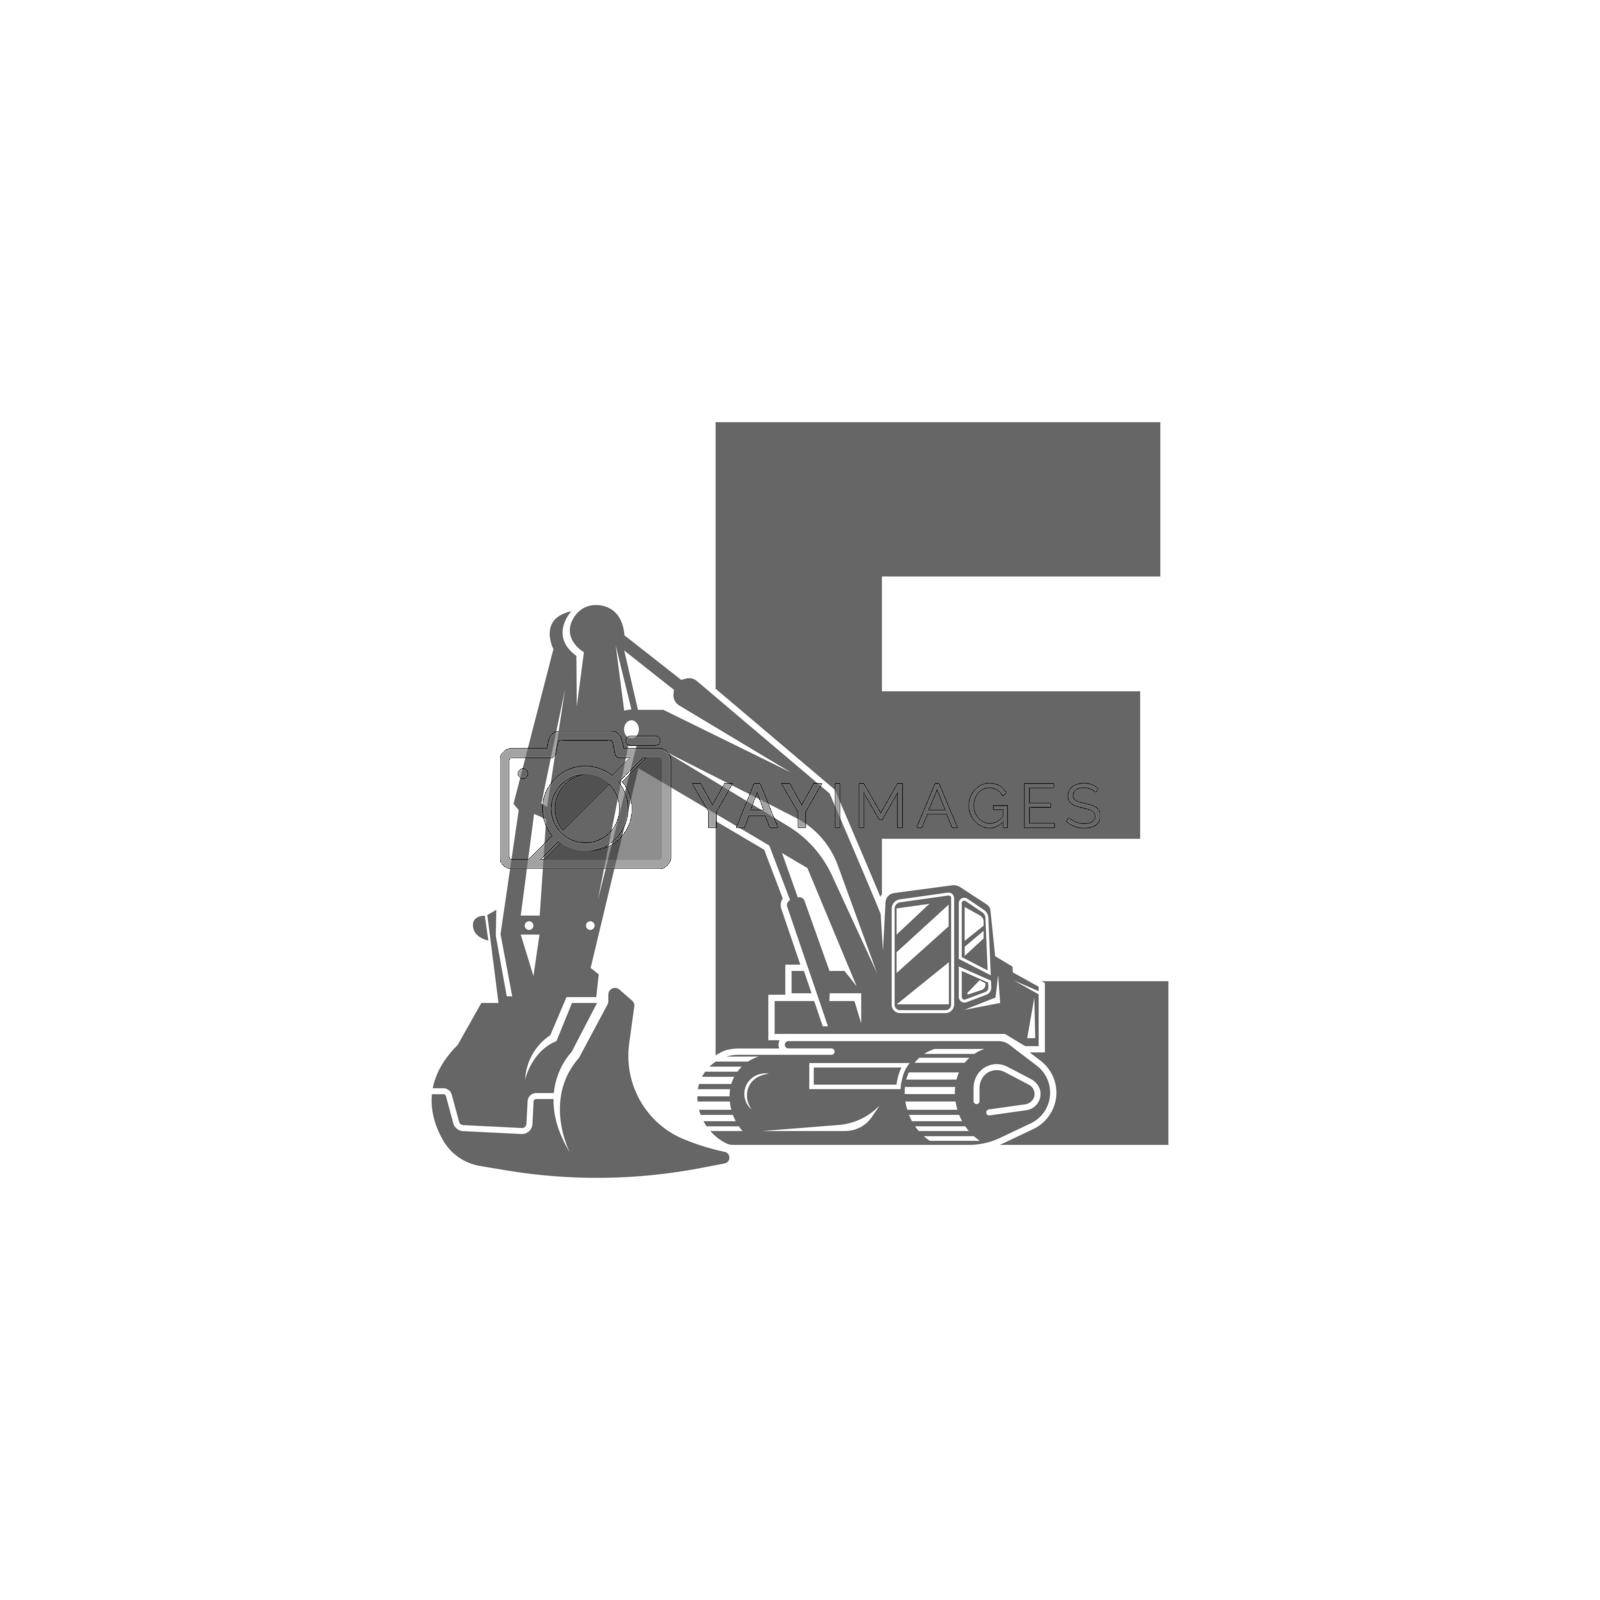 Royalty free image of Excavator icon with letter E design illustration by bellaxbudhong3